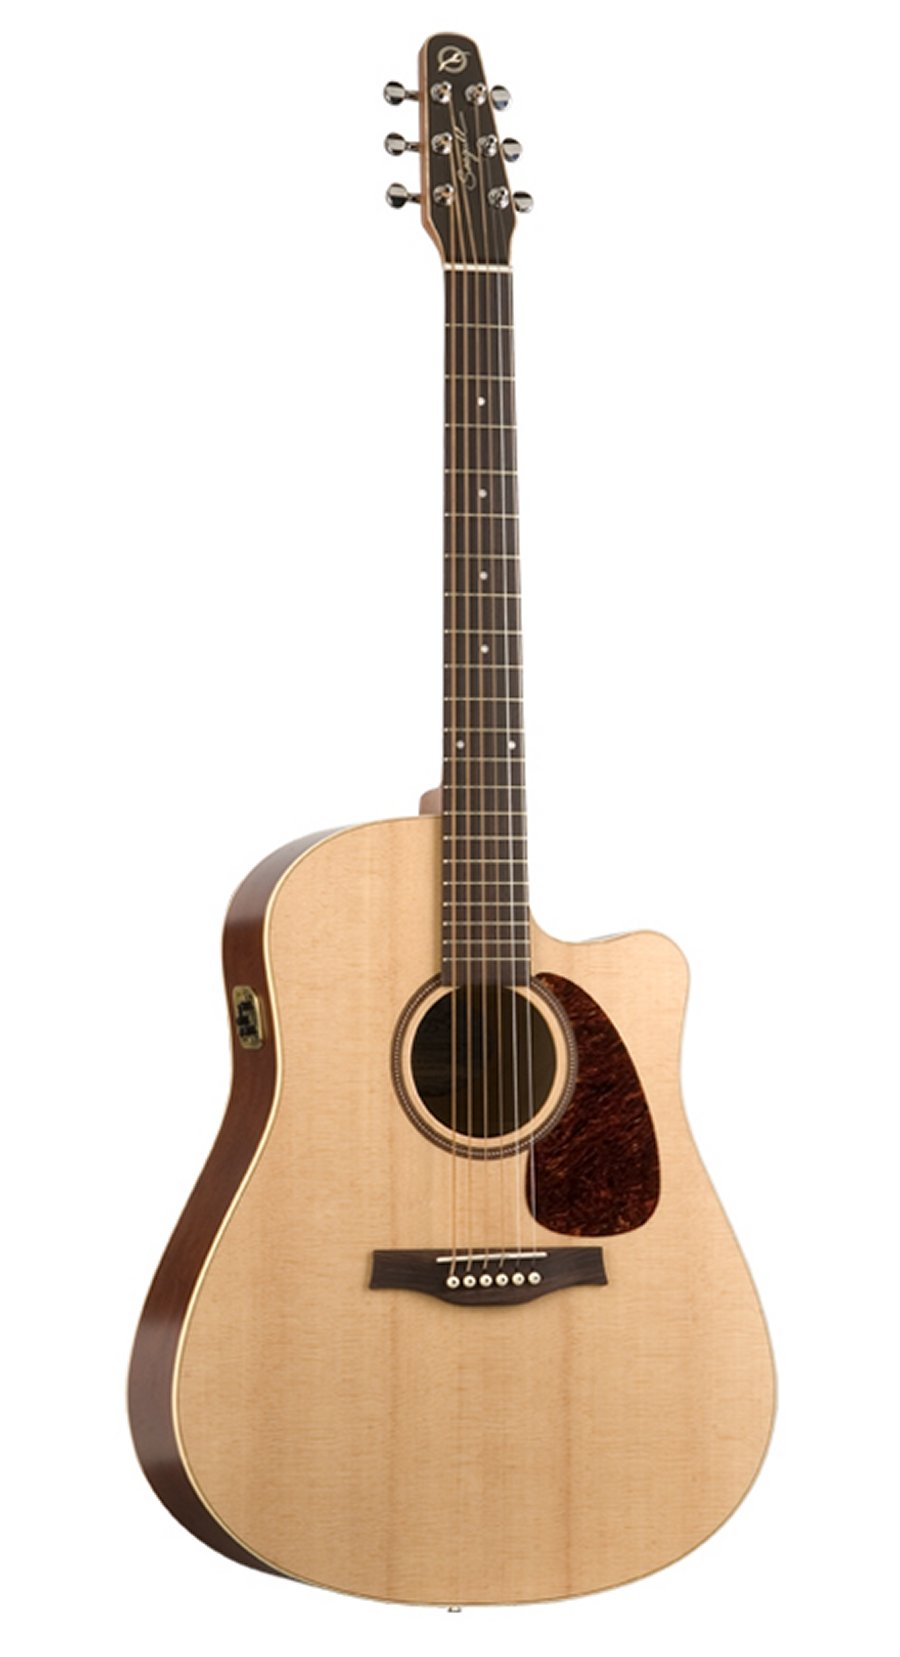 Seagull 030910 / 051908 Coastline SLIM CW Spruce QIT Acoustic Electric Guitar with Carrying Bag MADE In CANADA